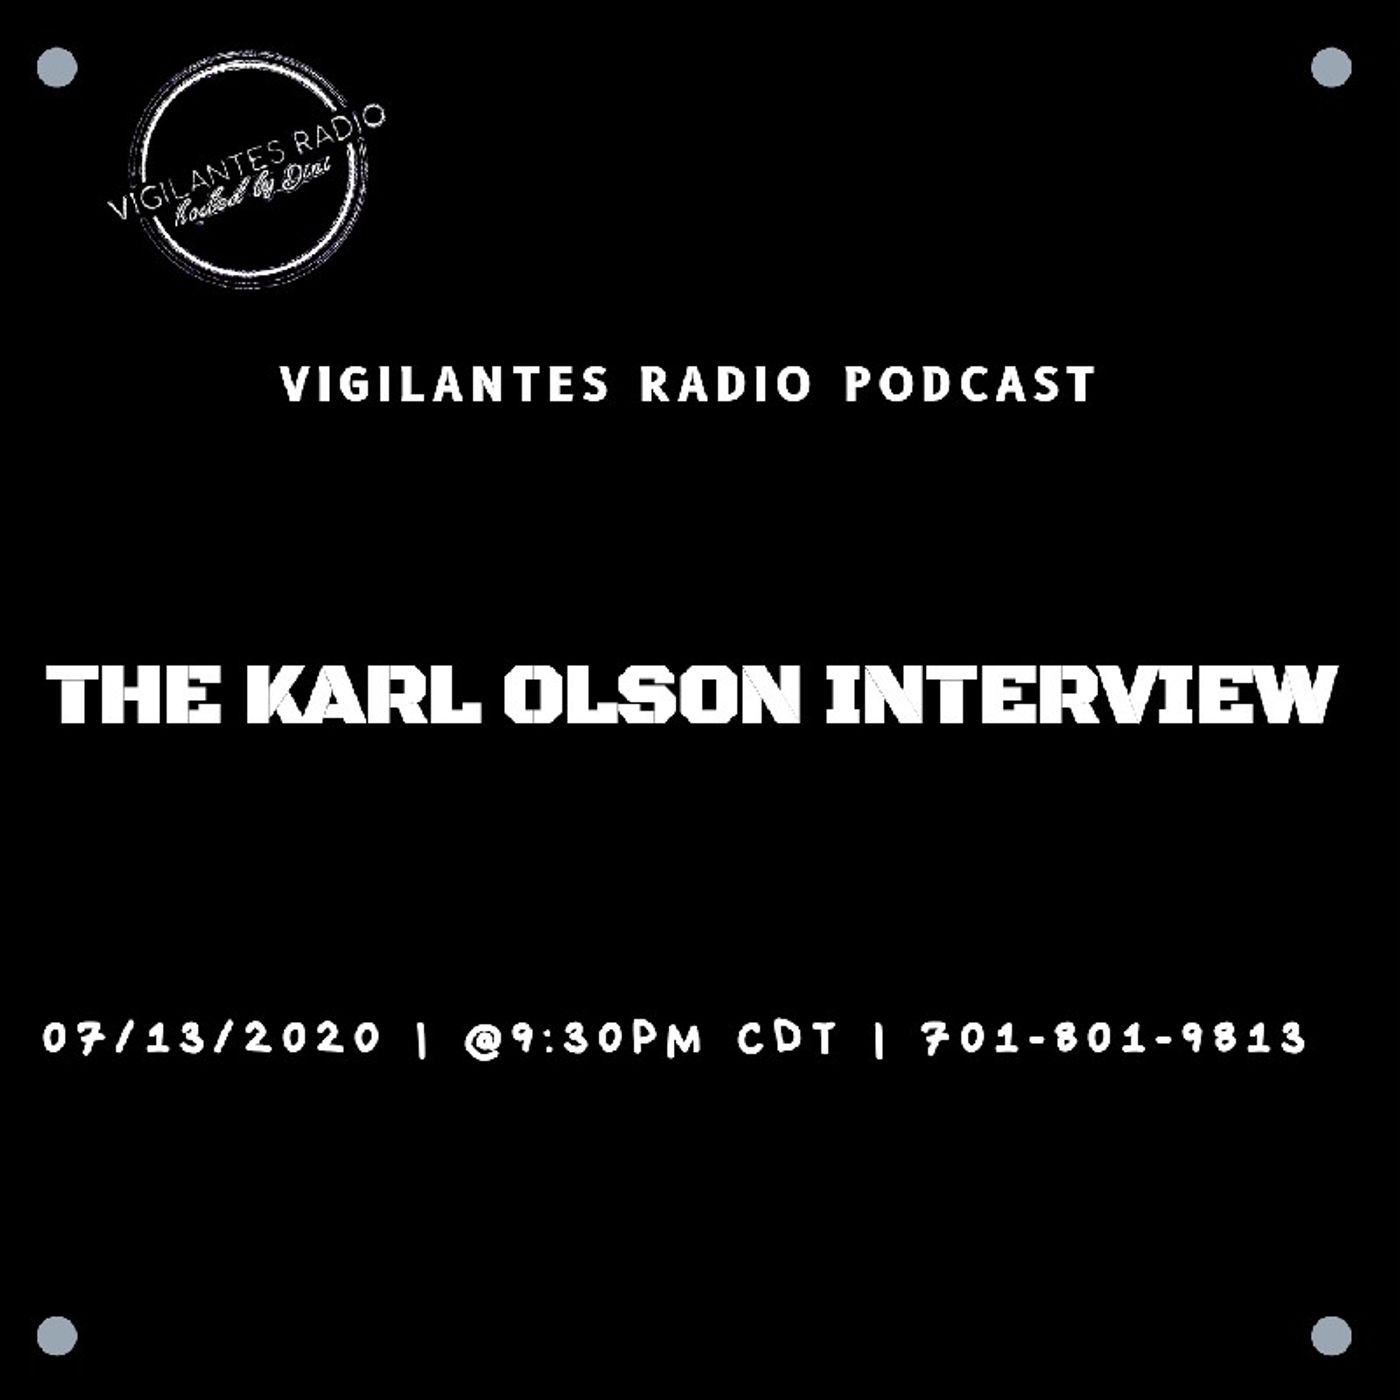 The Karl Olson Interview. Image